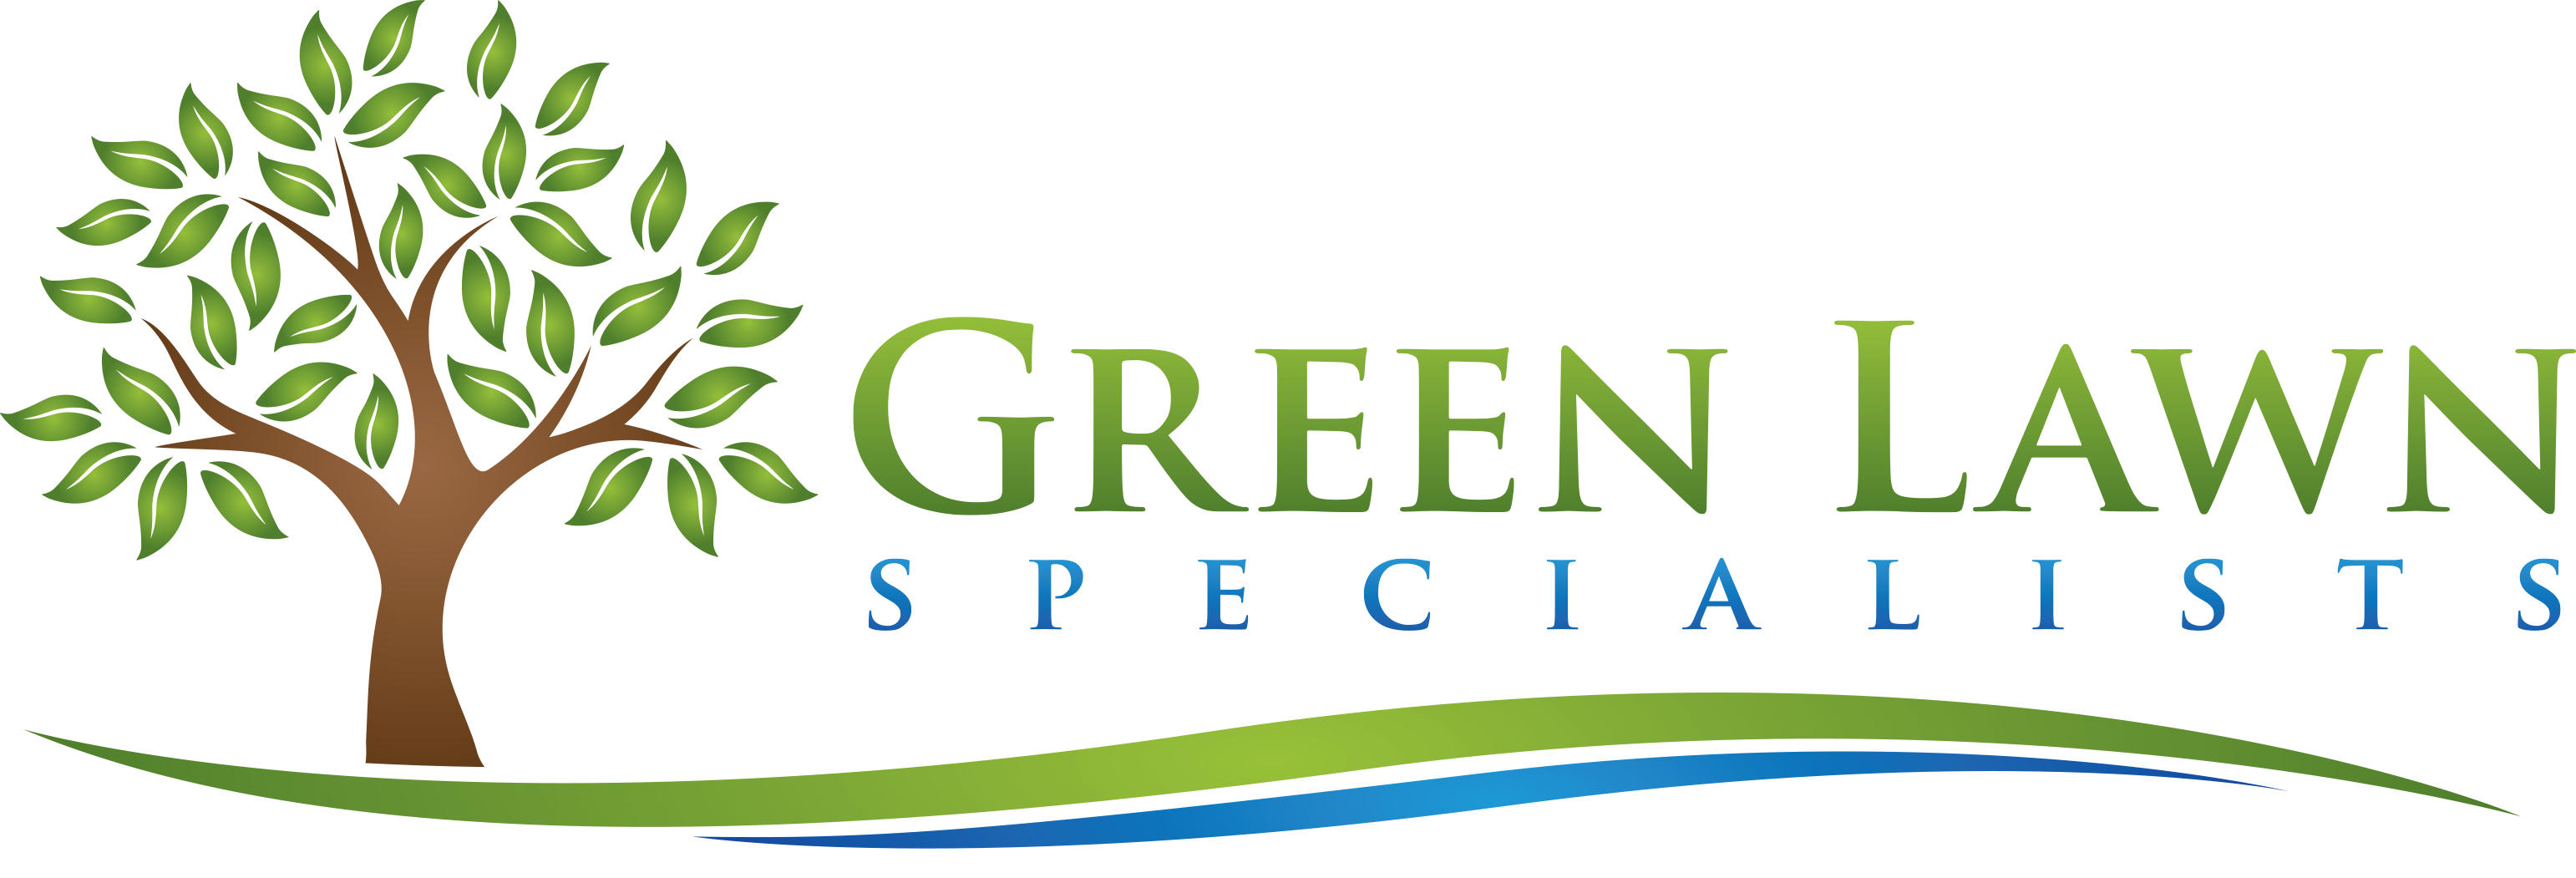 Green Lawn Specialists